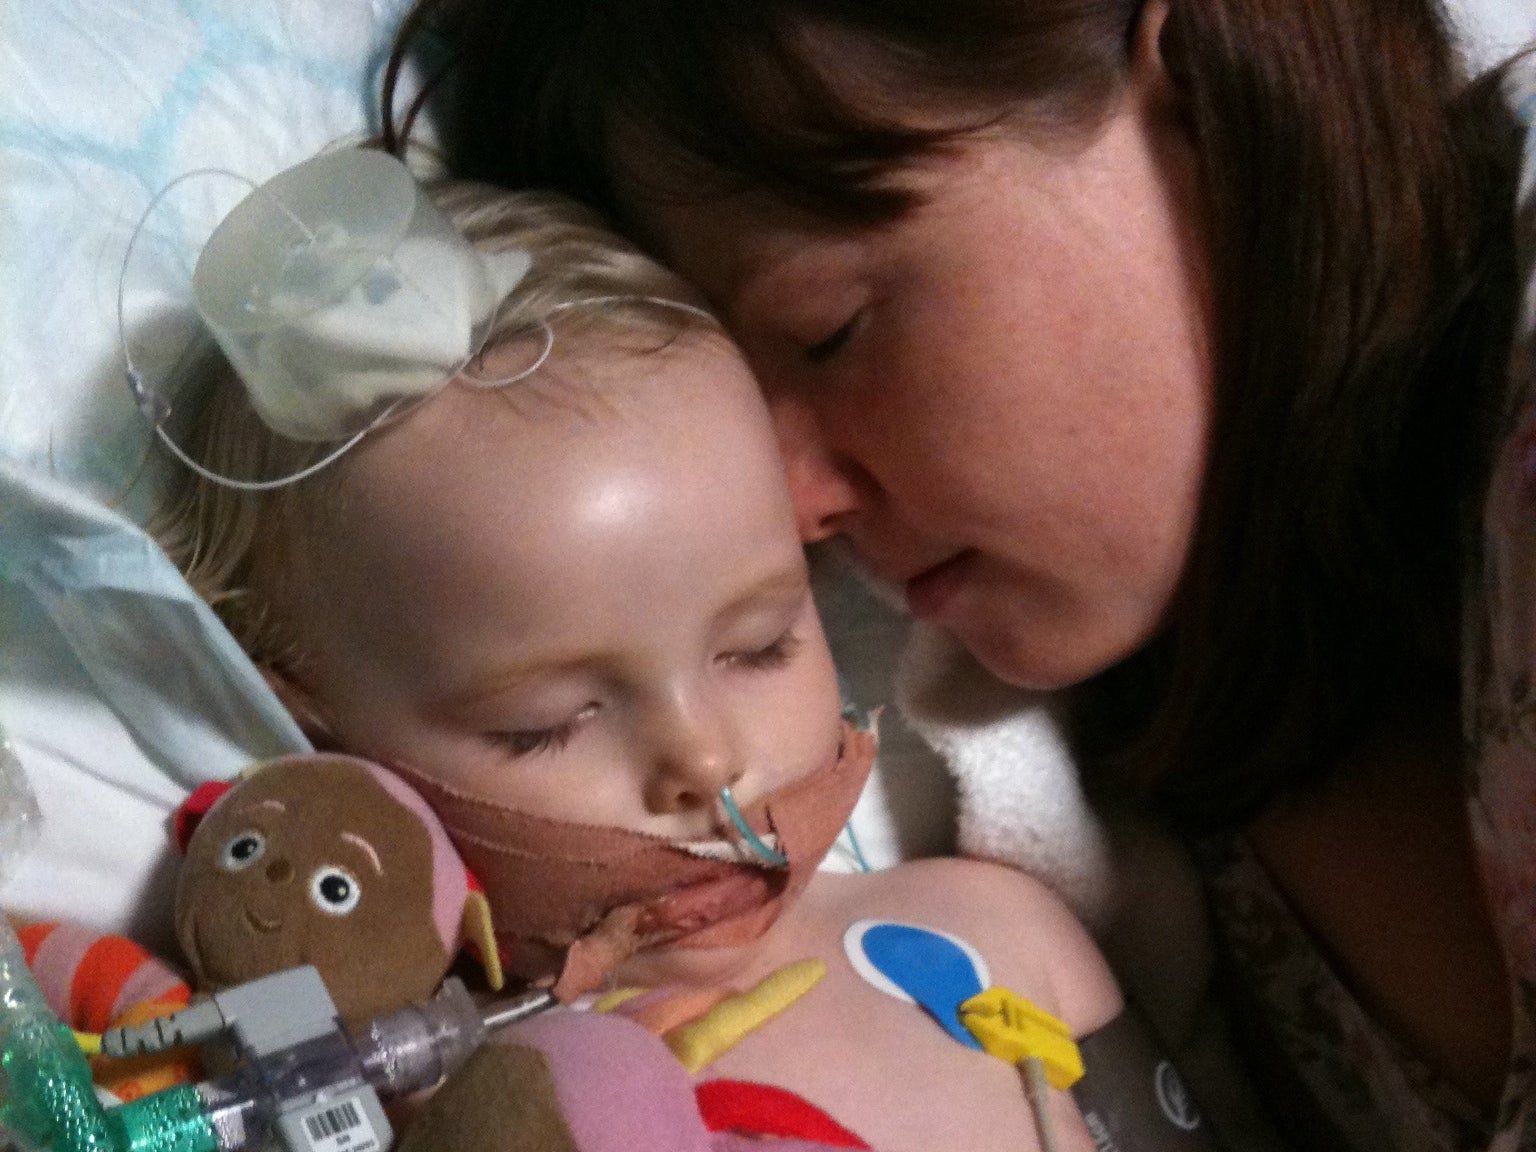 Jo Hughes with her daughter Jasmine in intensive care at Great Ormond Street